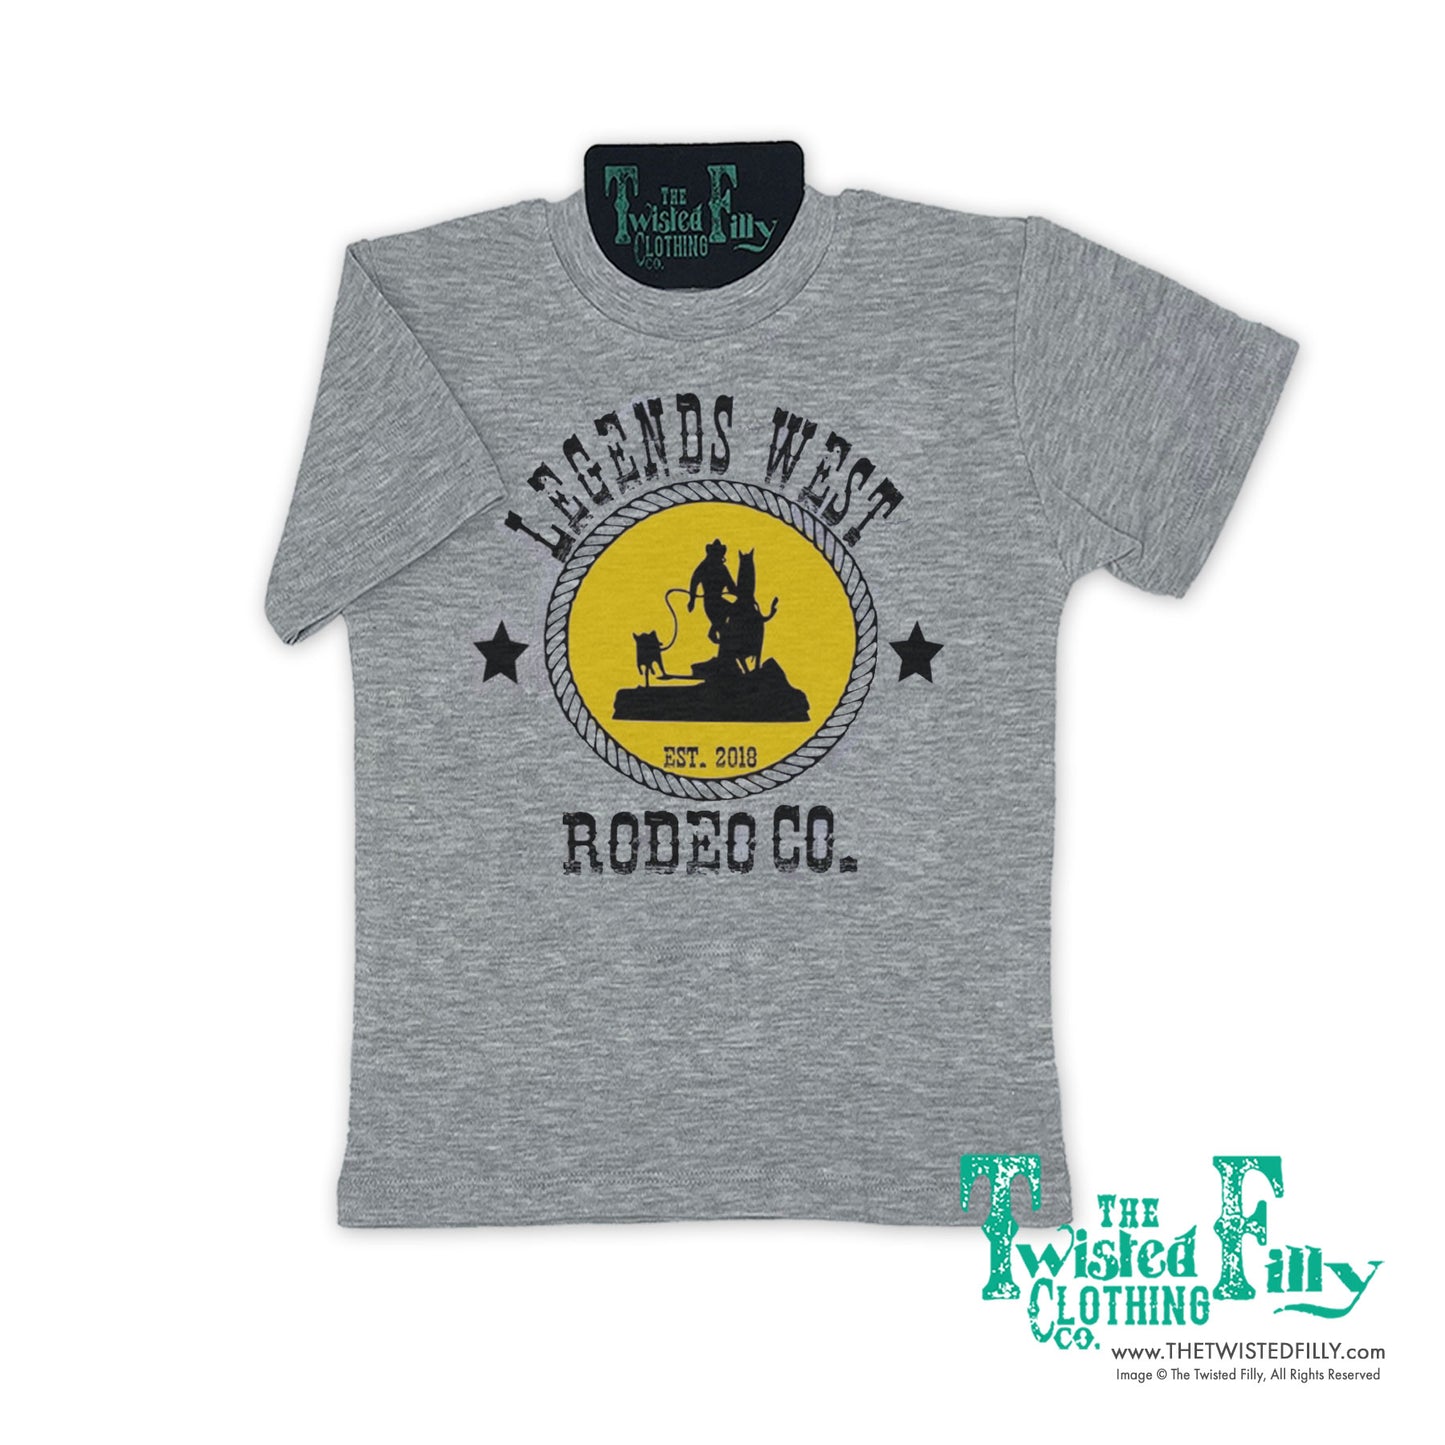 Legends West Rodeo Co. Calf Roper - S/S Infant Tee - Gray